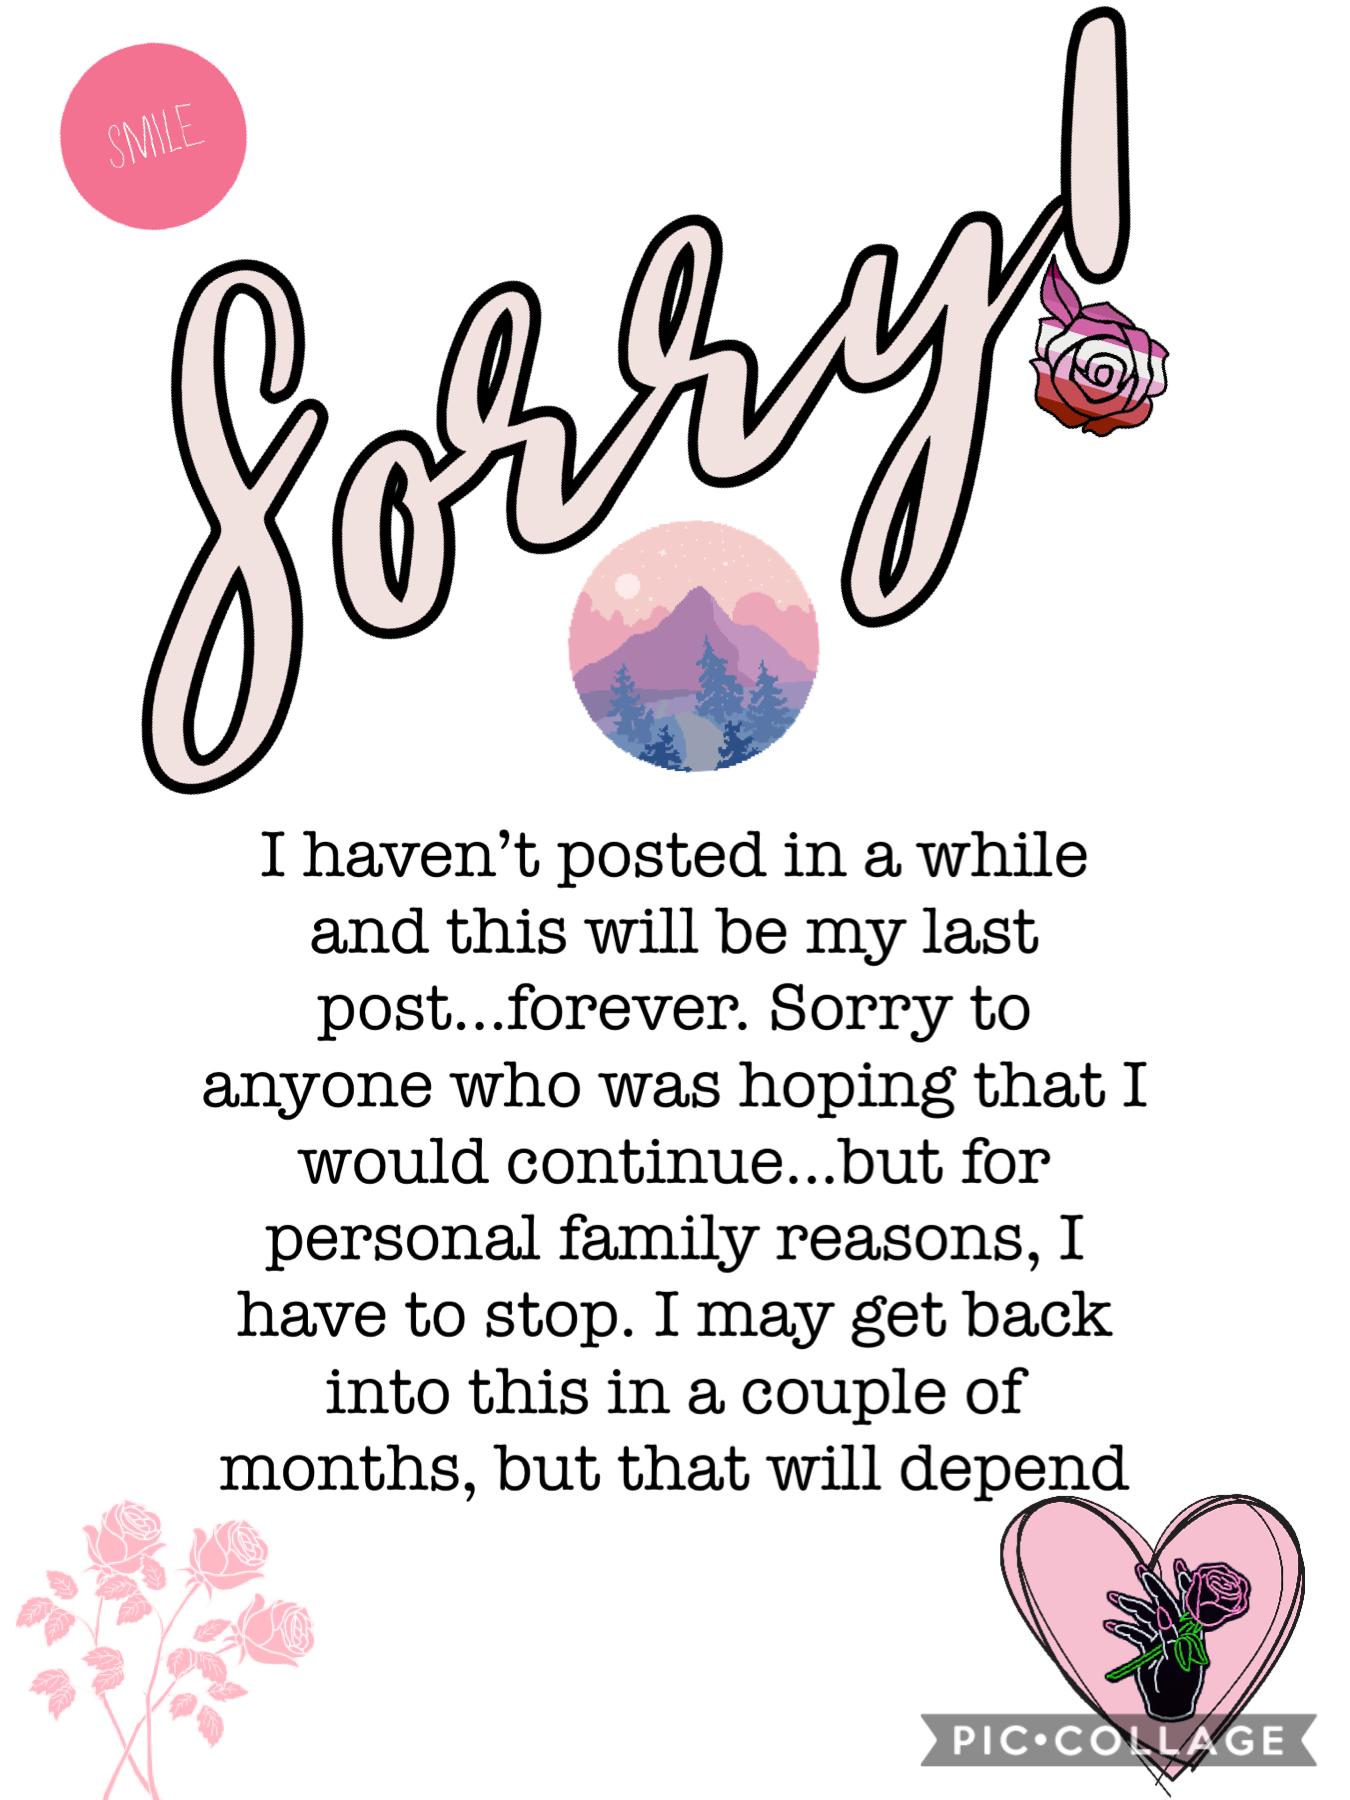 So sorry about this!